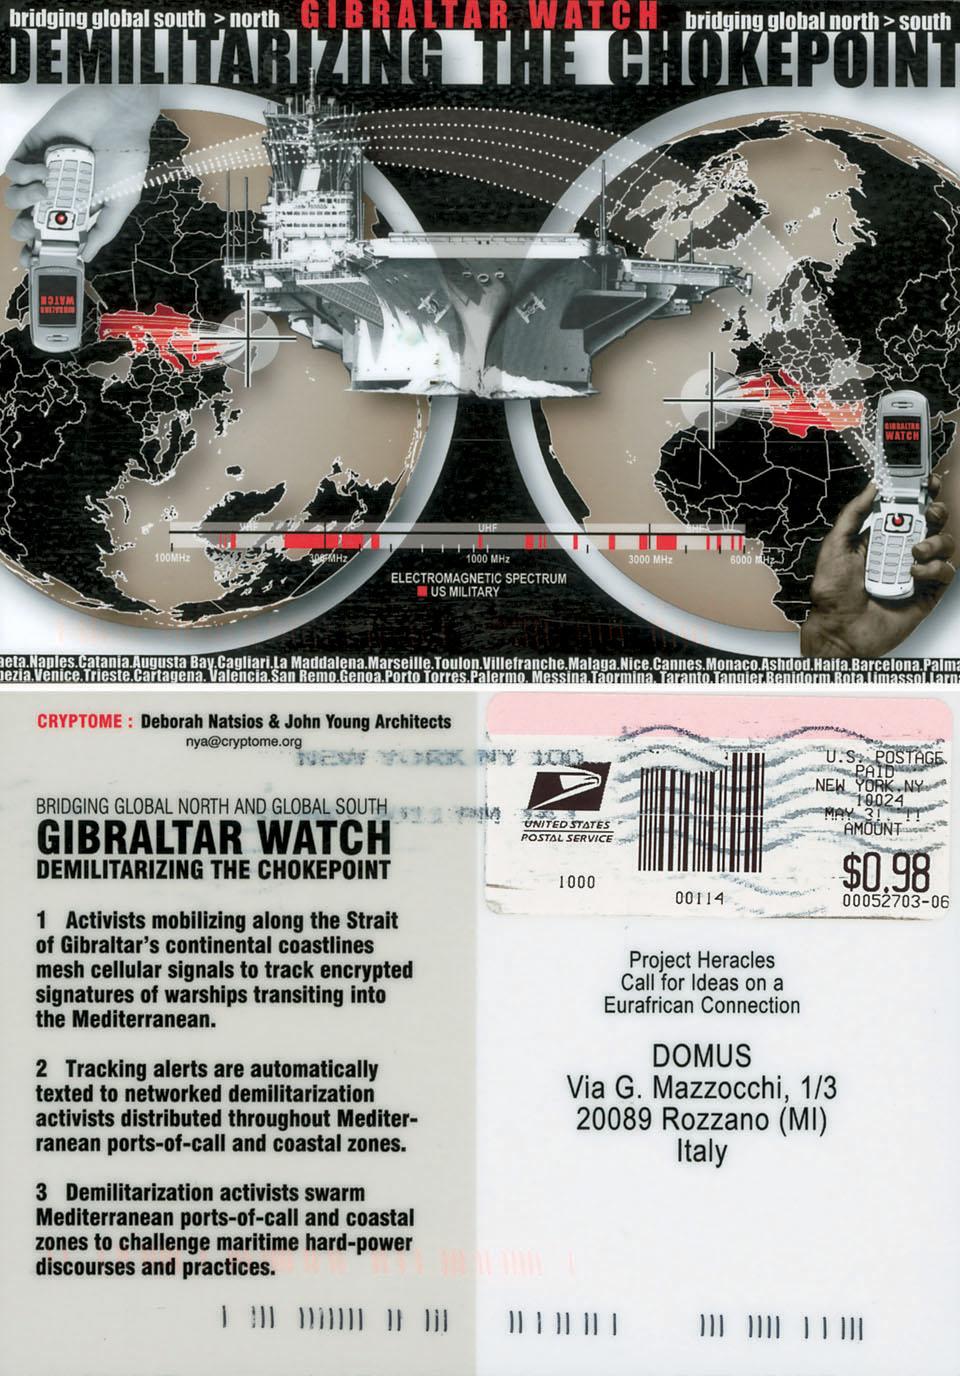 Gibraltar Watch. Demilitarizing the checkpoint, design by Cryptome (Deborah Natsios & John Young Architects), New York.